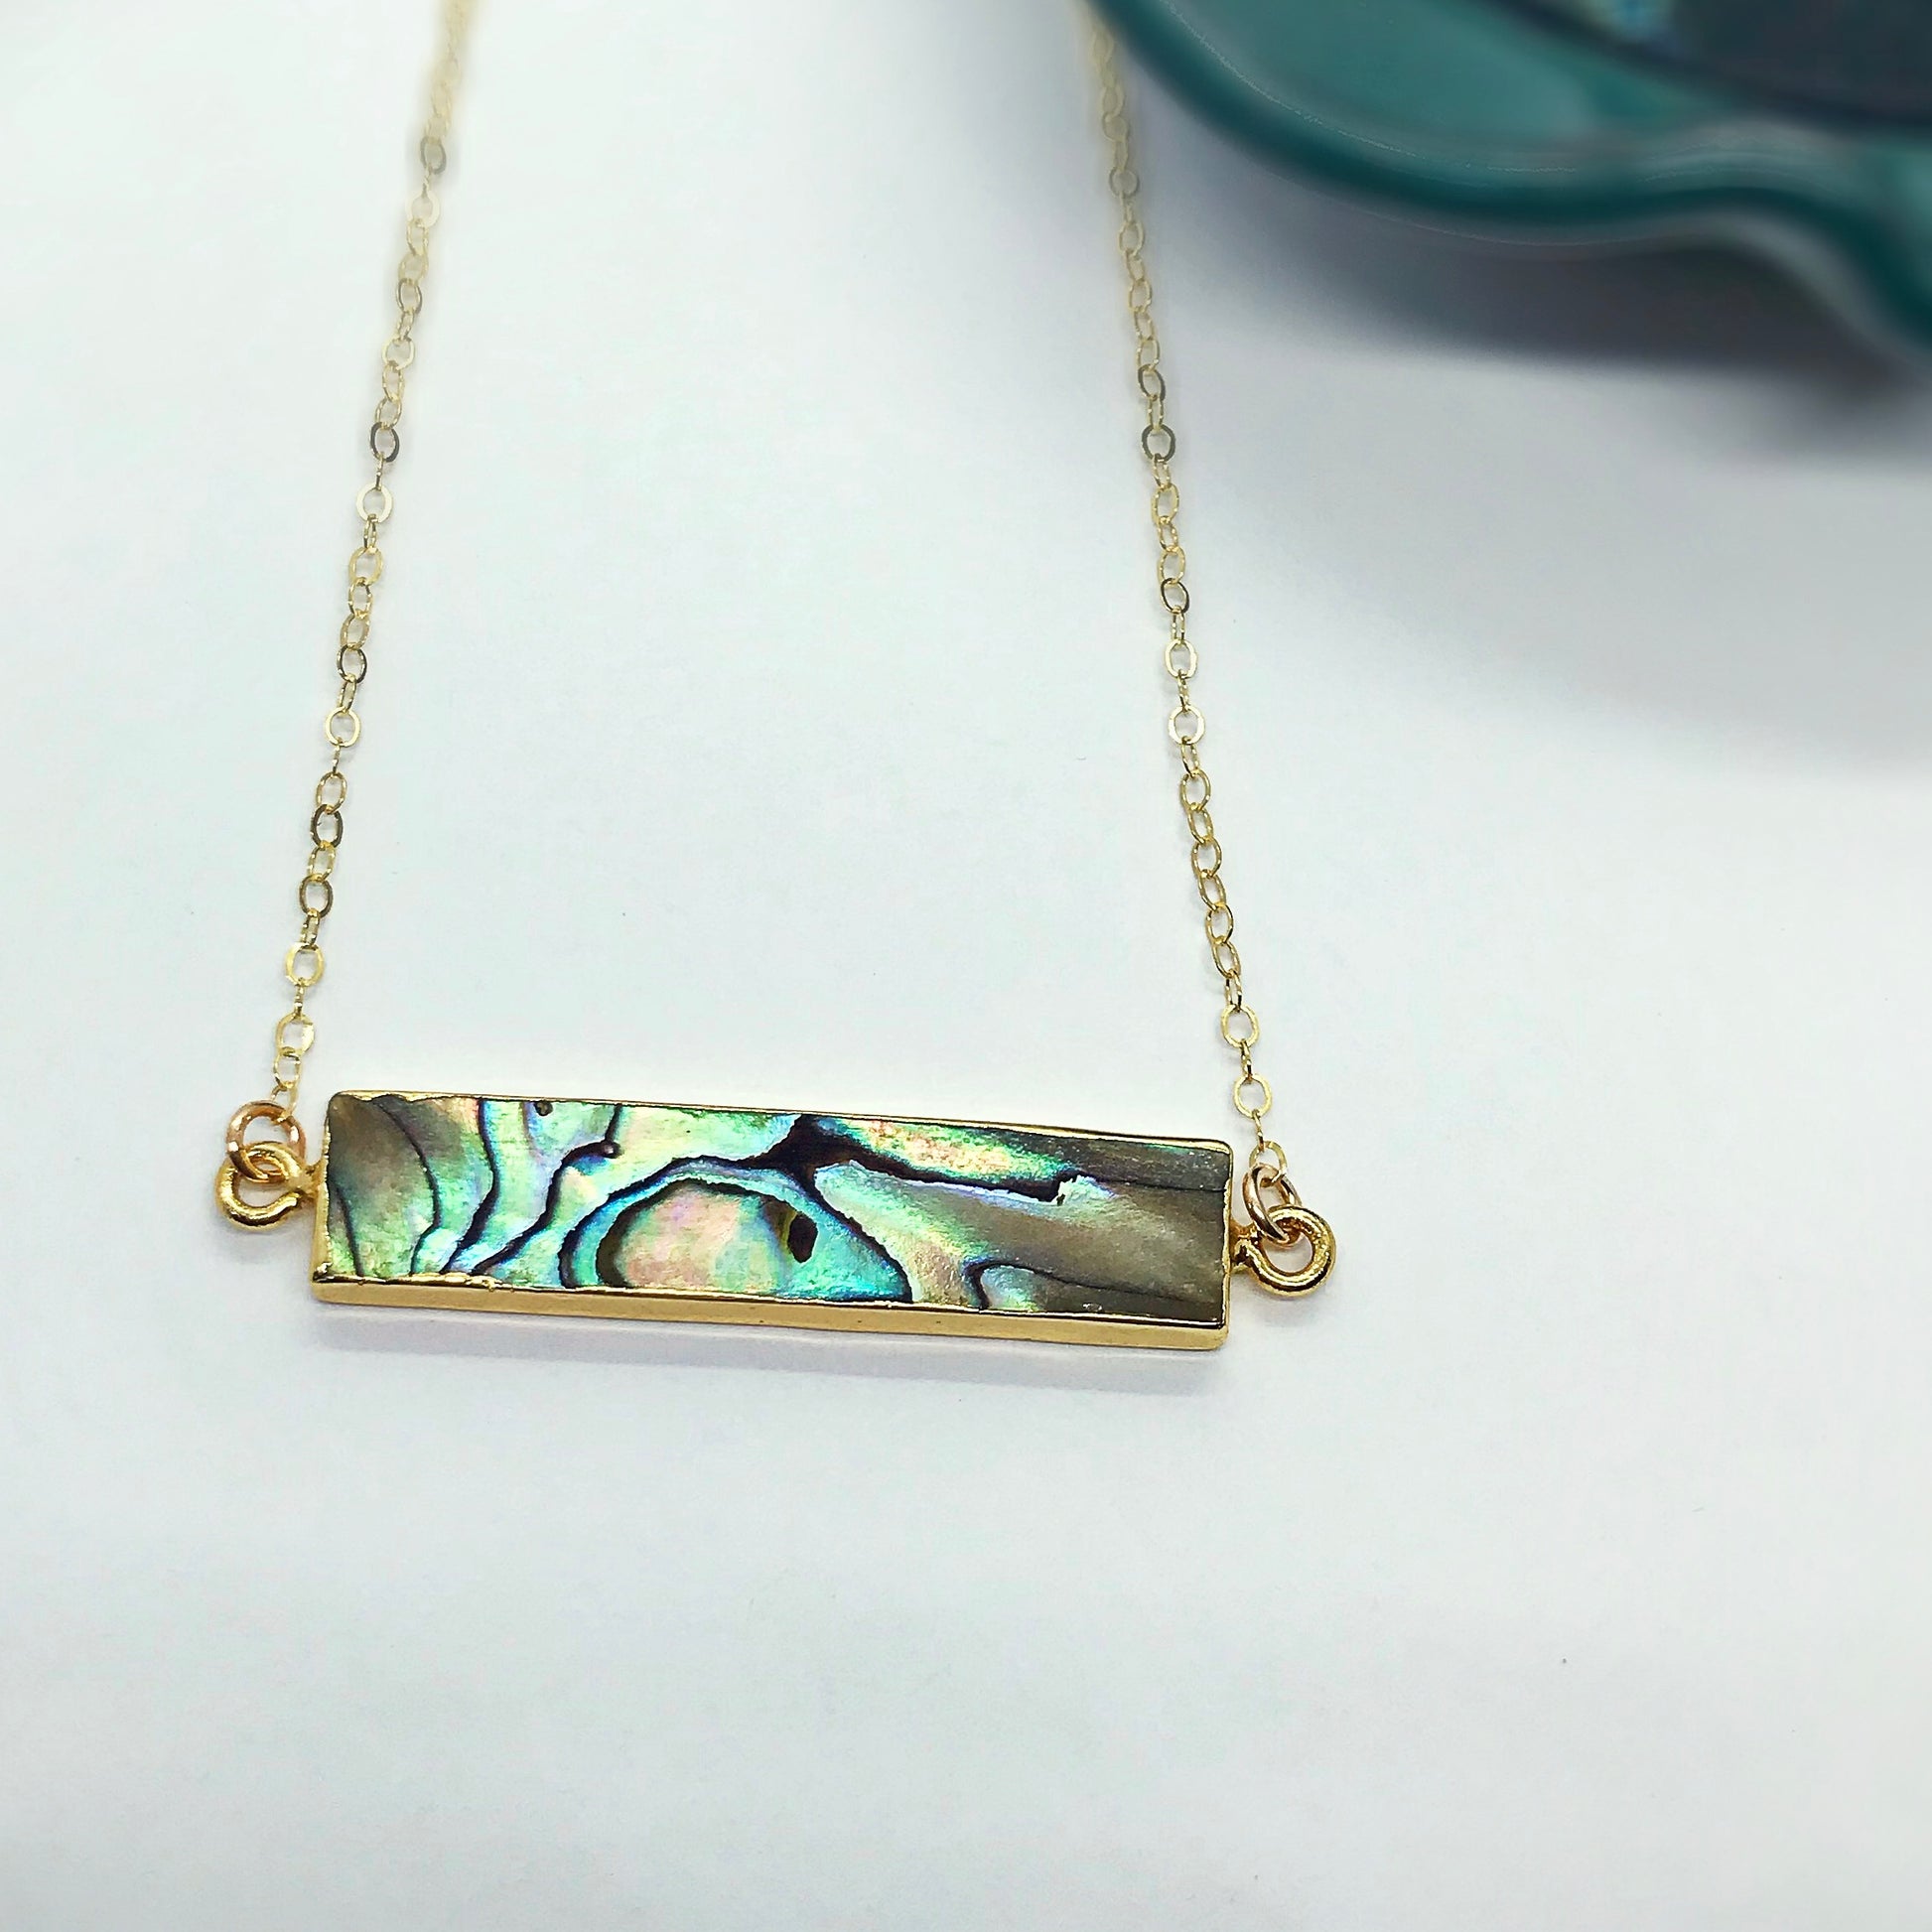 Abalone Bar Necklace - Blue Sky Feathers